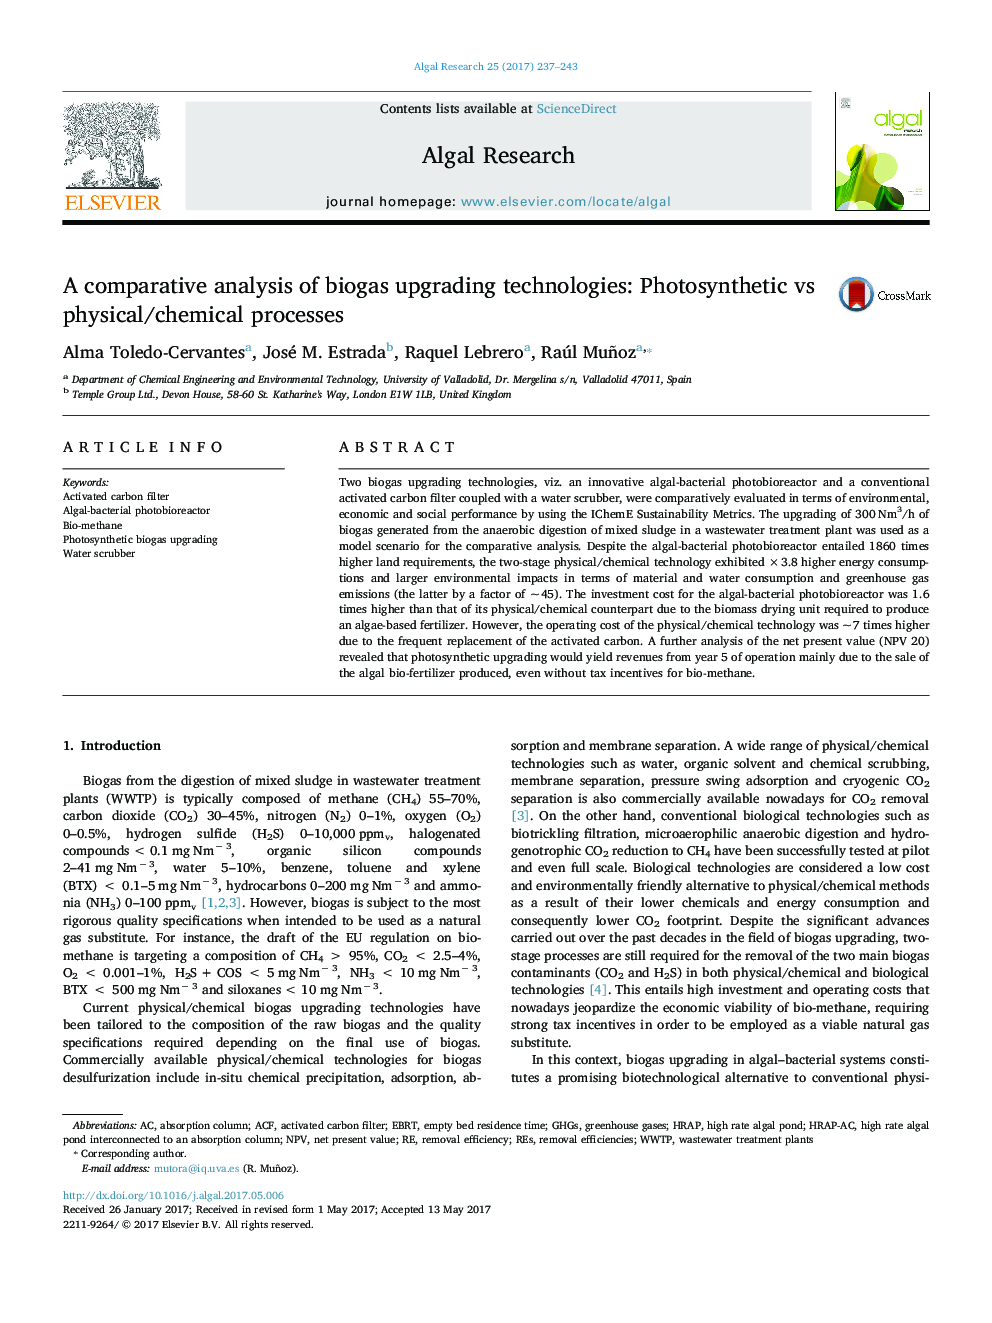 A comparative analysis of biogas upgrading technologies: Photosynthetic vs physical/chemical processes